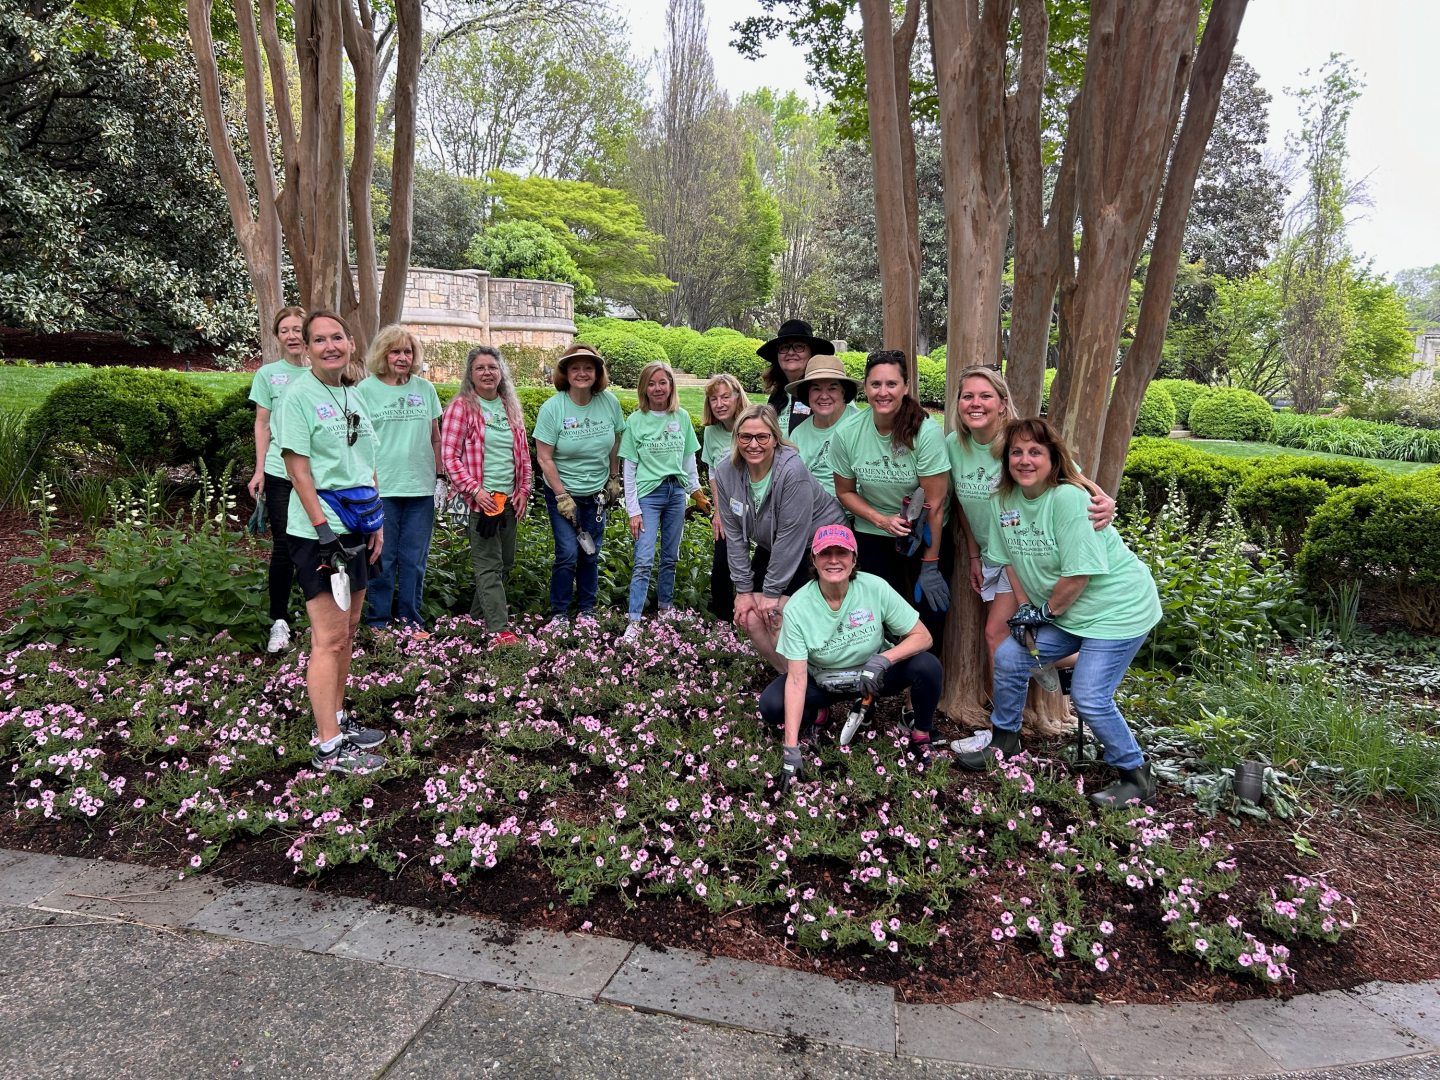 Look at this beautiful planting done by our Spring Volunteers!